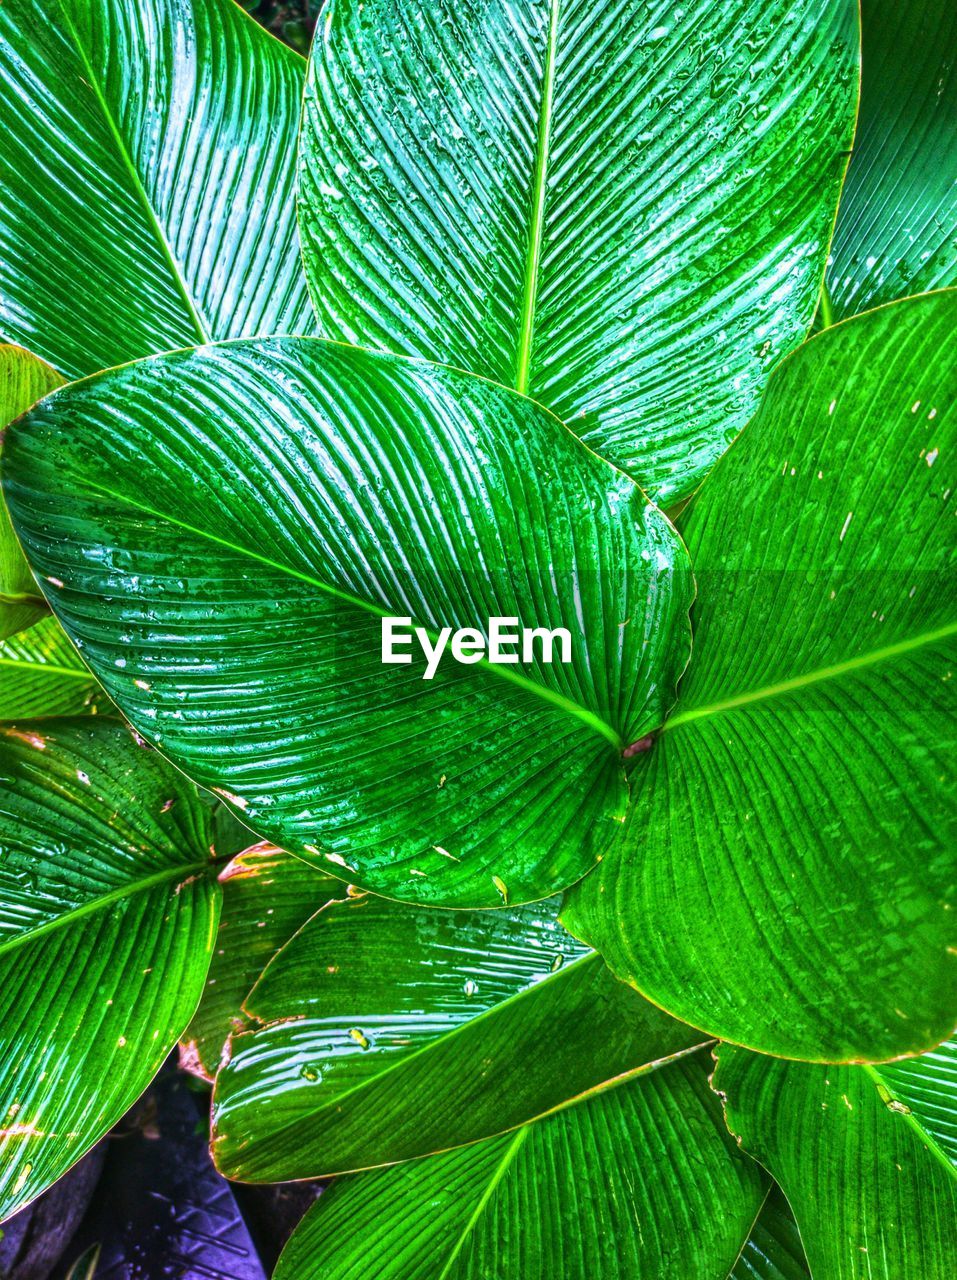 leaf, green, plant part, plant, growth, tree, beauty in nature, close-up, full frame, backgrounds, nature, no people, flower, day, freshness, pattern, outdoors, branch, tropical climate, botany, lush foliage, foliage, leaf vein